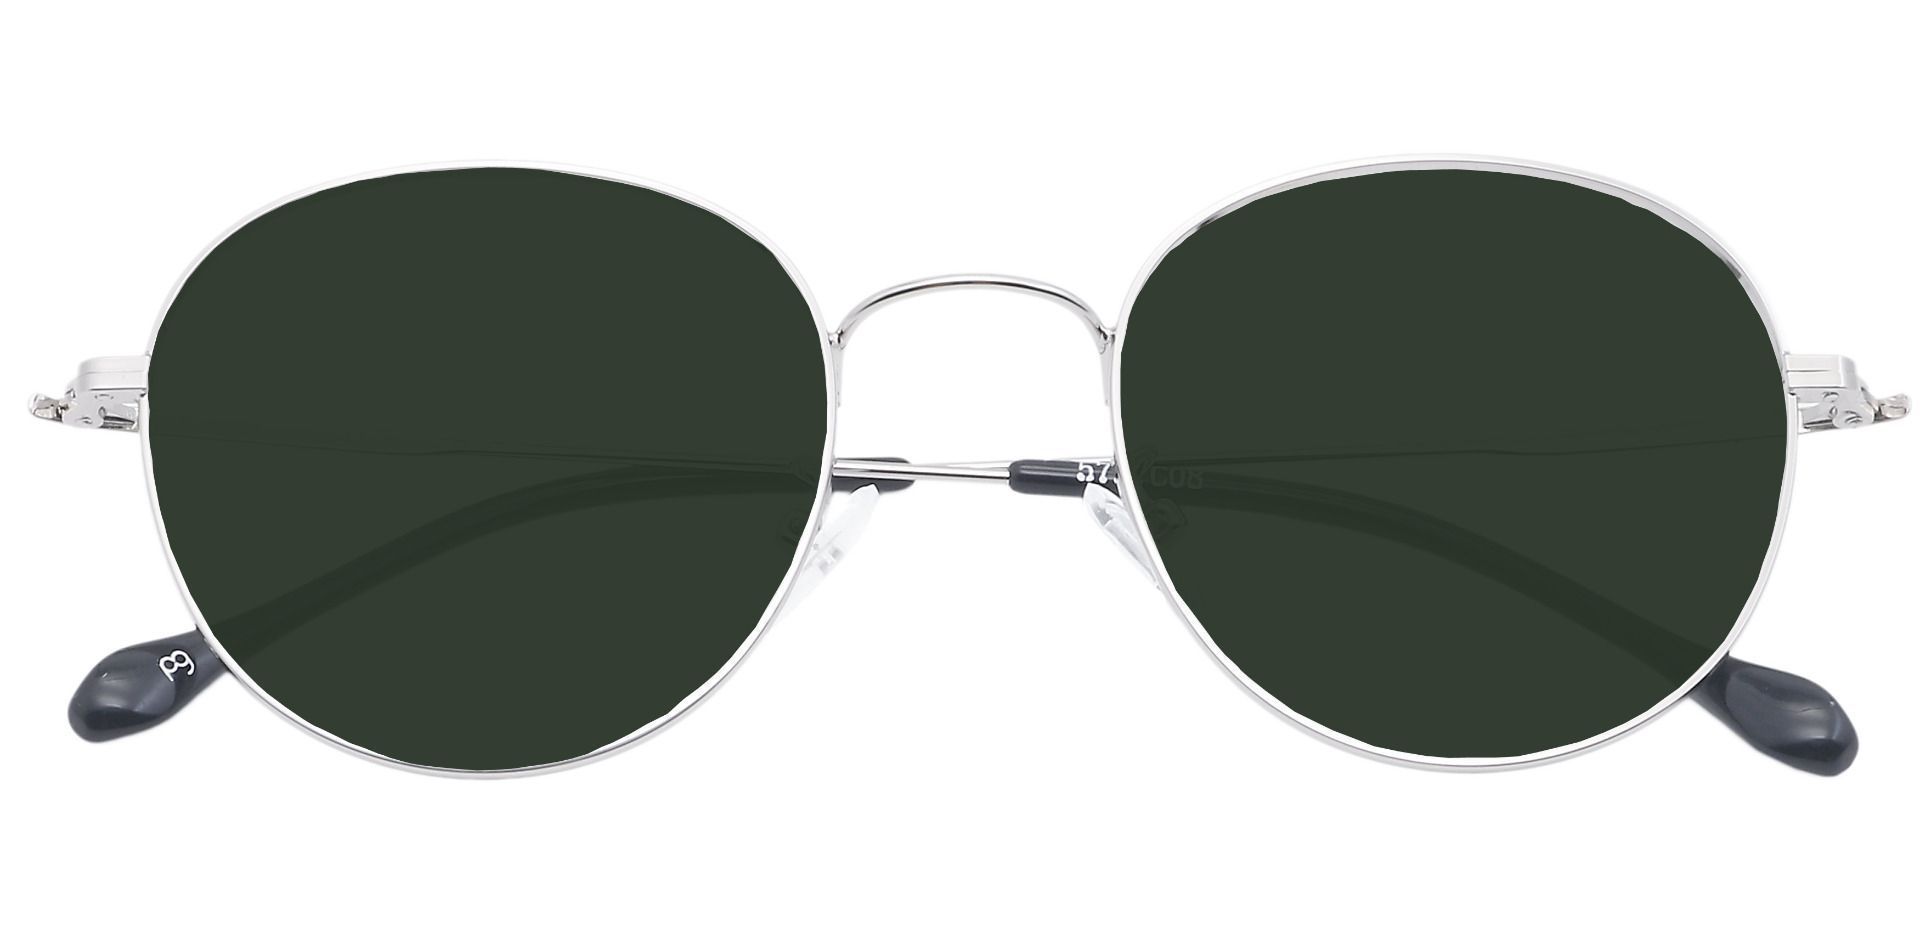 Miller Oval Non-Rx Sunglasses - Gray Frame With Green Lenses